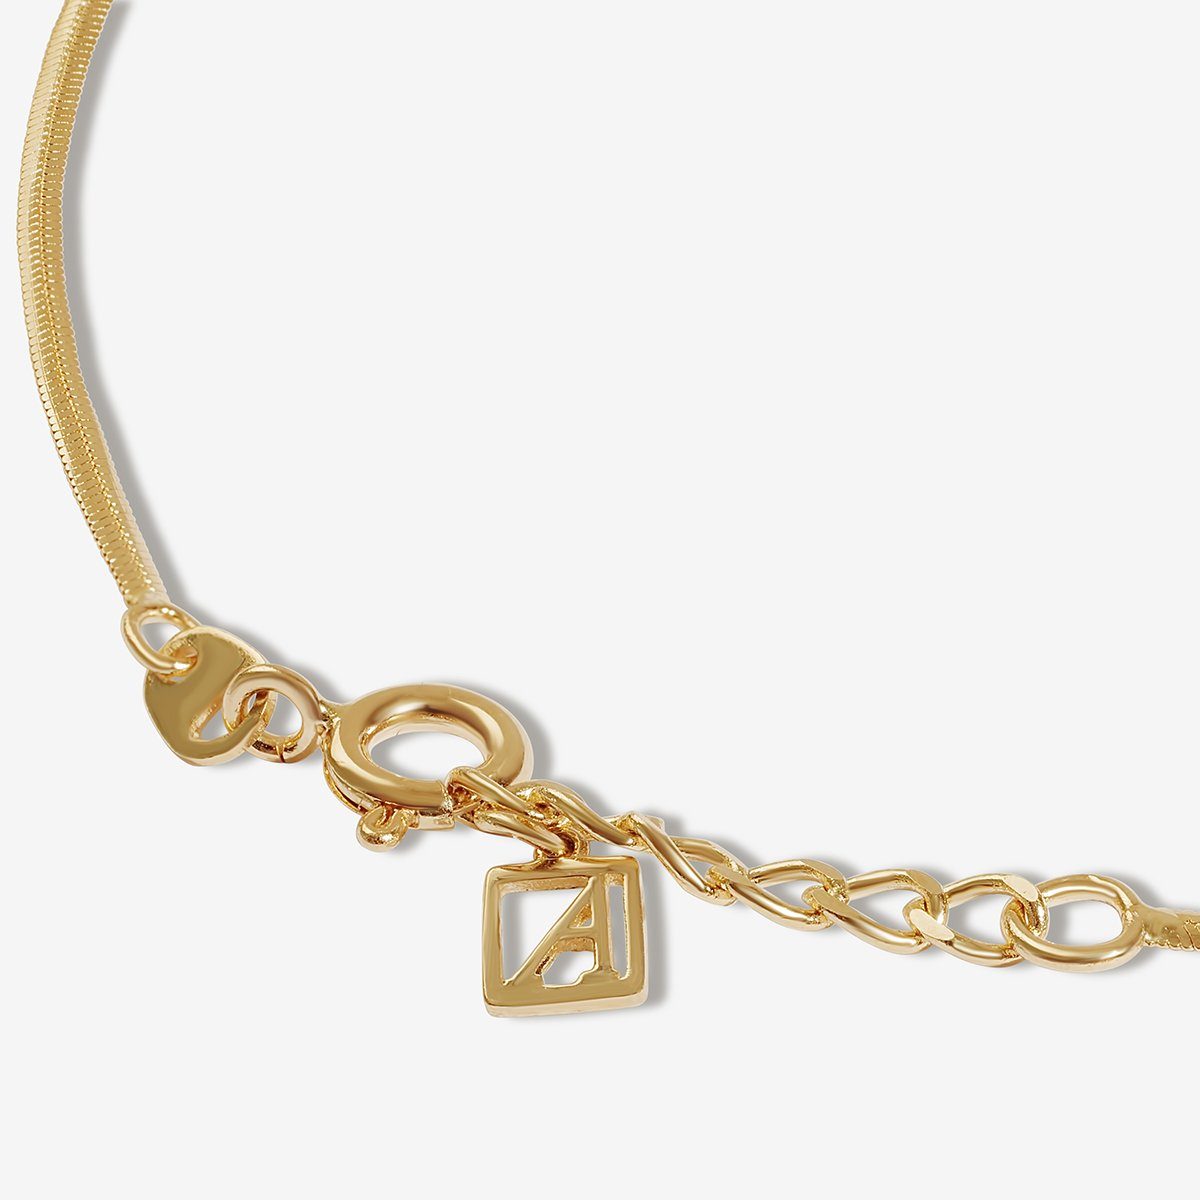 Solid 14K Gold Christian Twisted Snake Chain Bracelet, Fine Jewelry